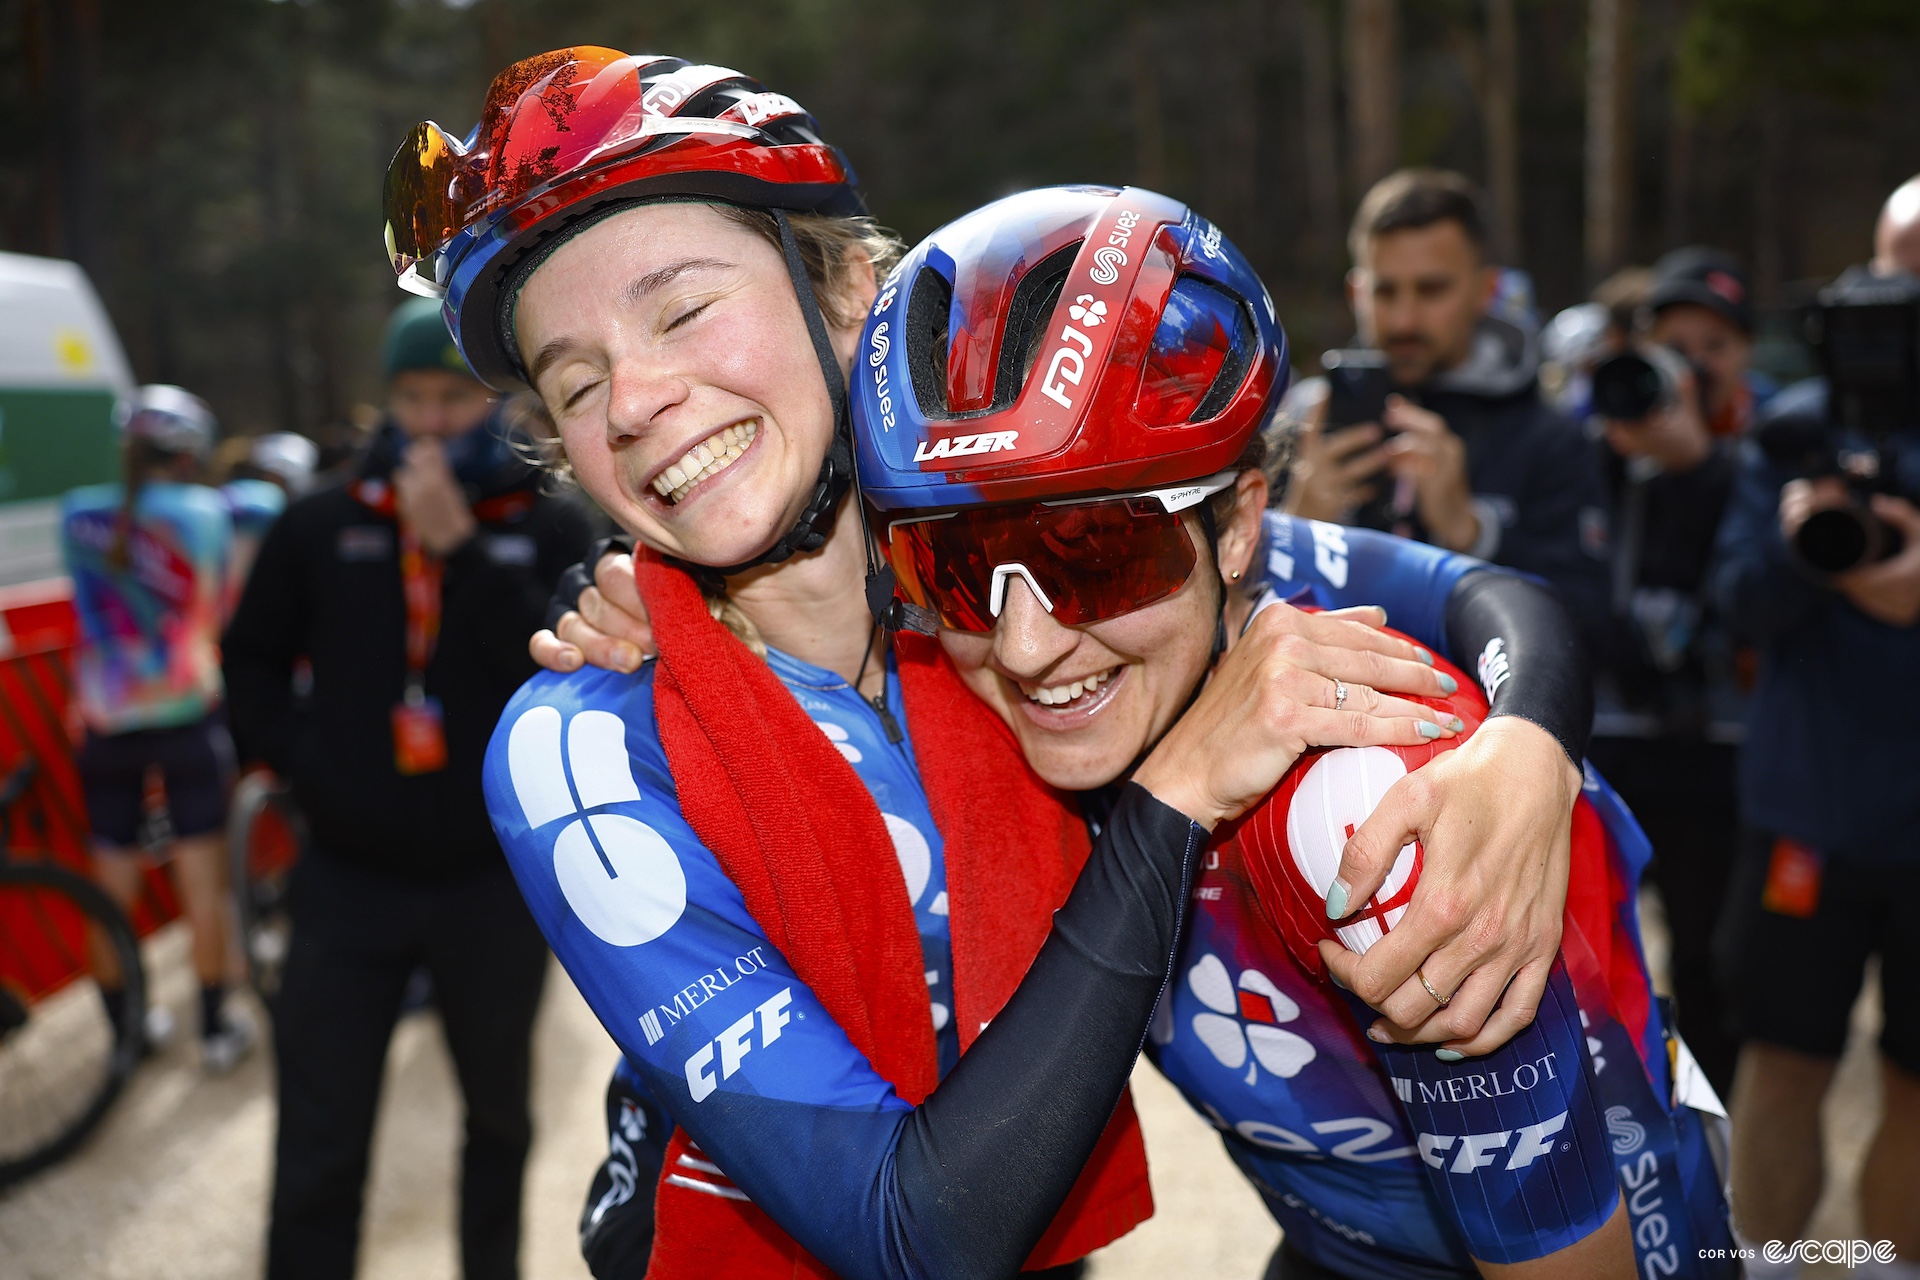 Grace Brown and Muzic embrace after Muzic's stage win in La Vuelta